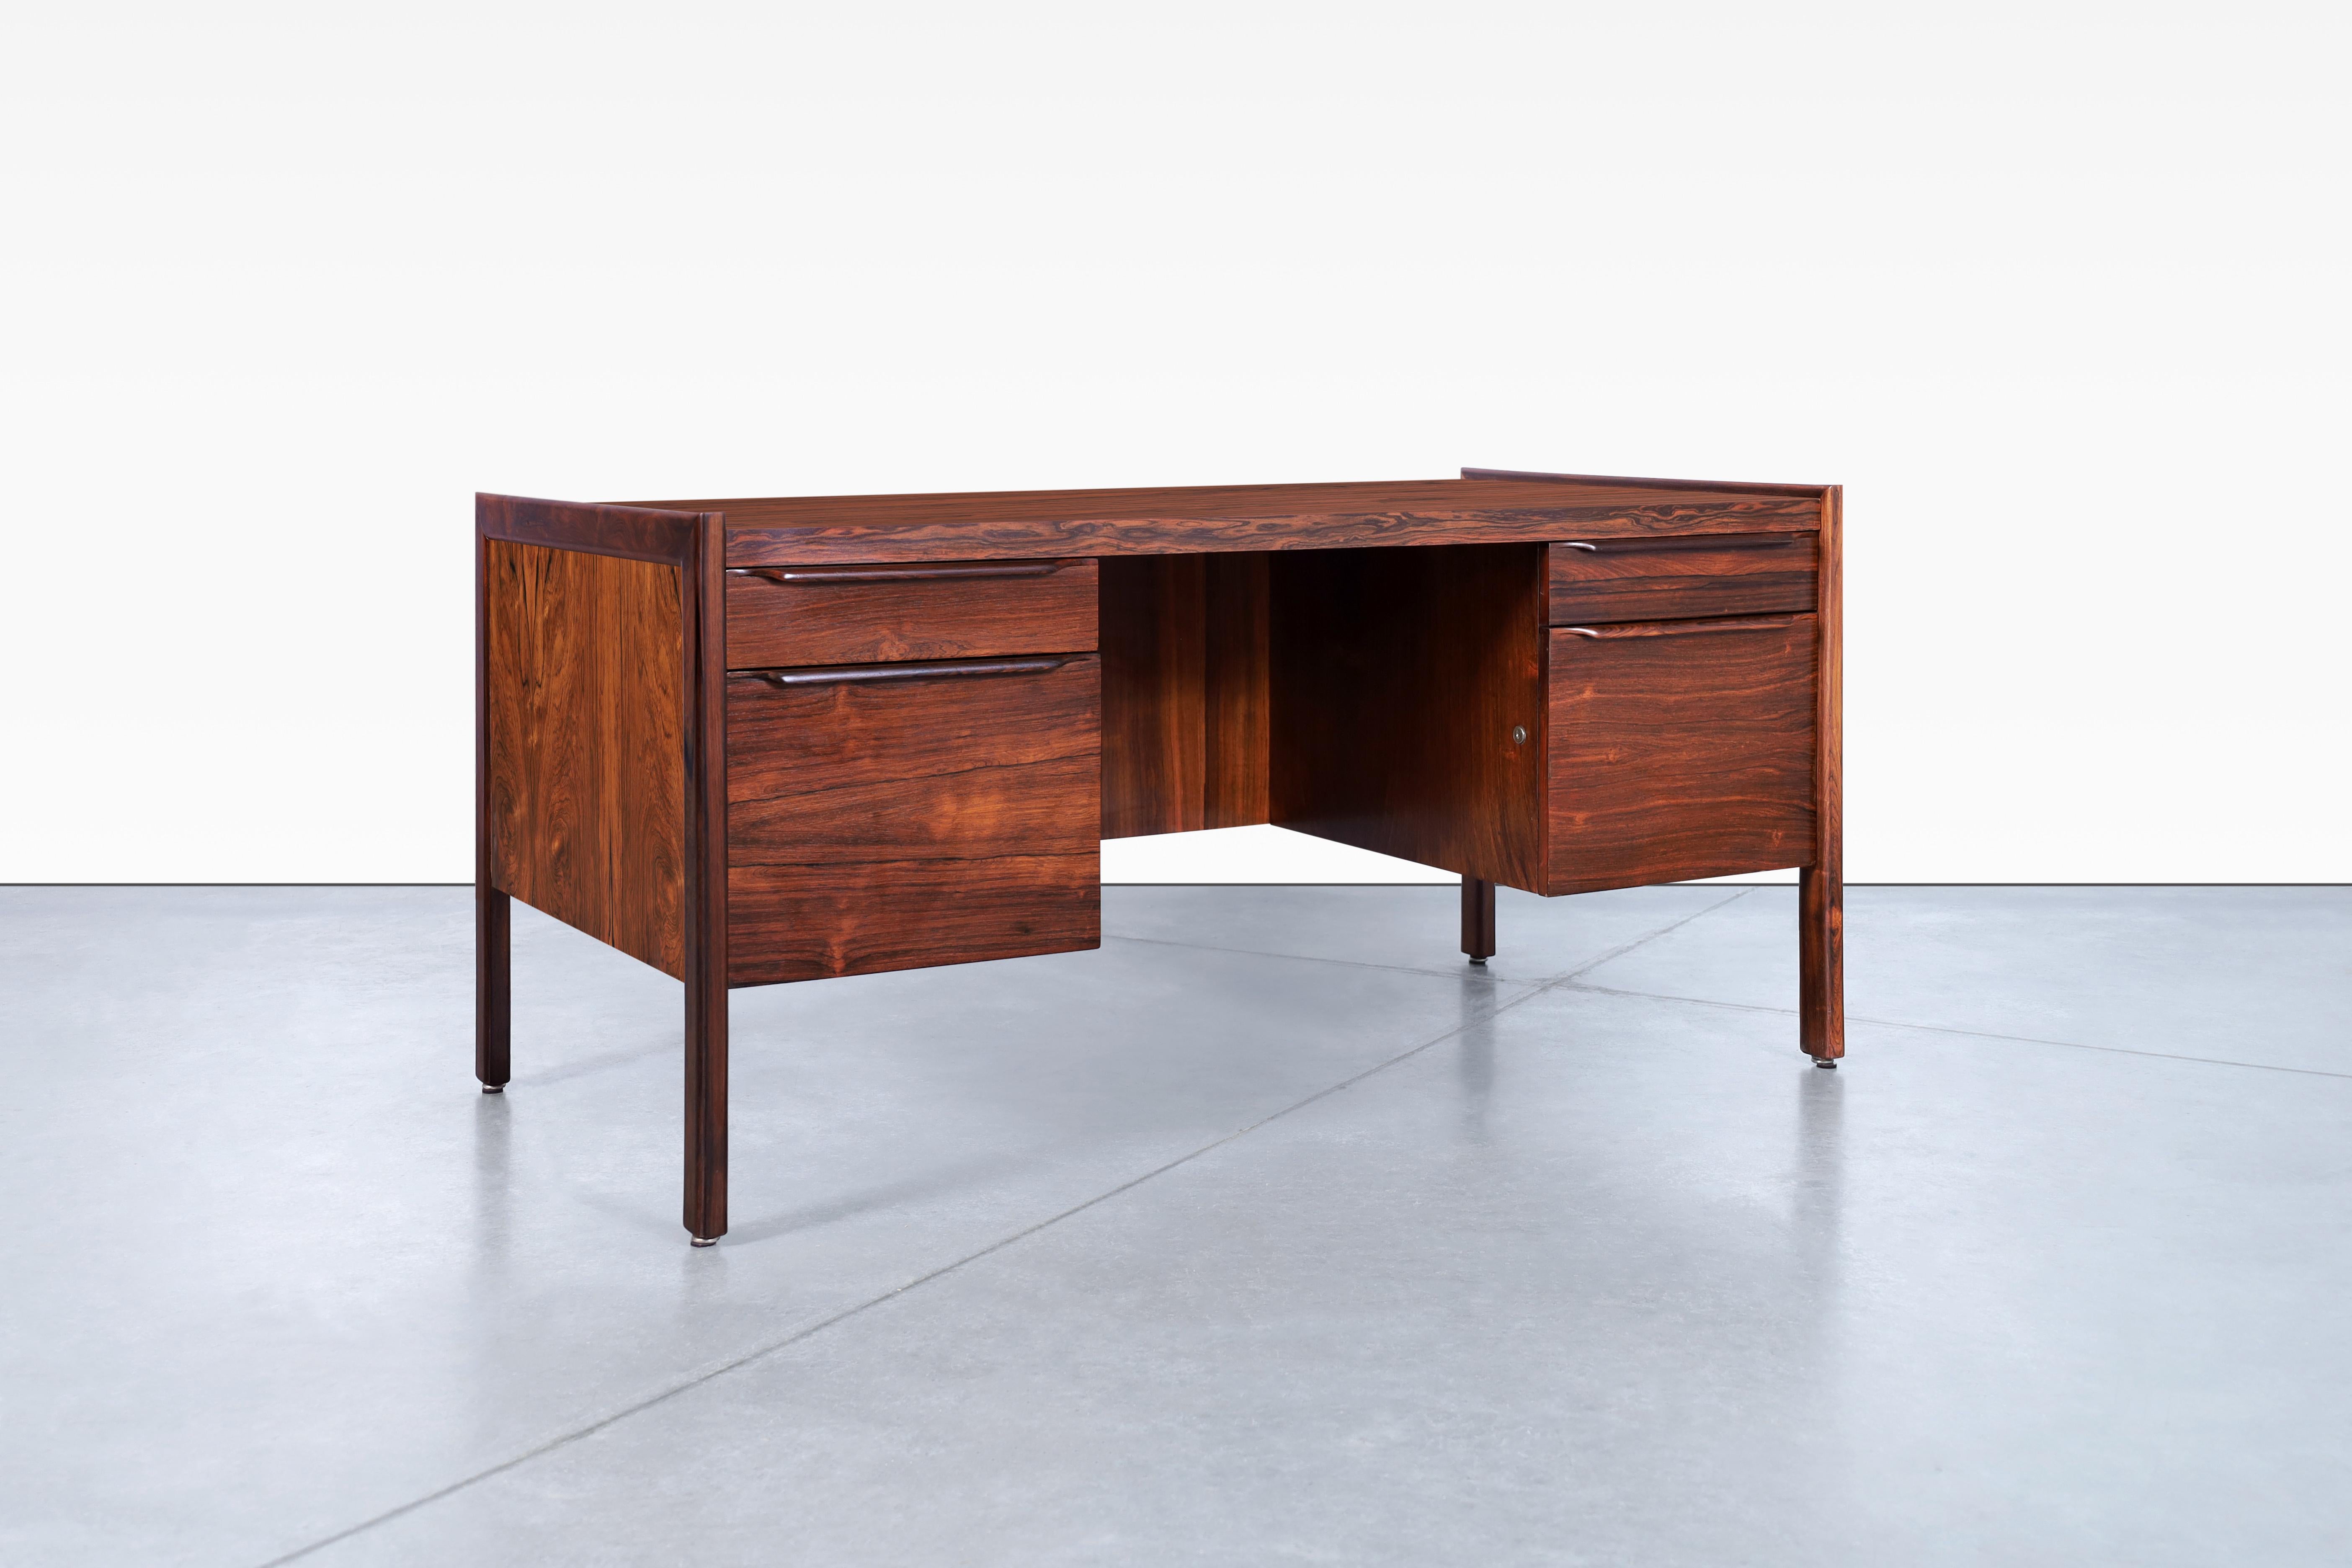 Fabulous Danish modern executive rosewood desk, designed in Denmark, circa 1960’s. The Brazilian rosewood desk has been carefully restored to reveal its natural beauty and incredible grain. Its stunning design is complemented by exquisite